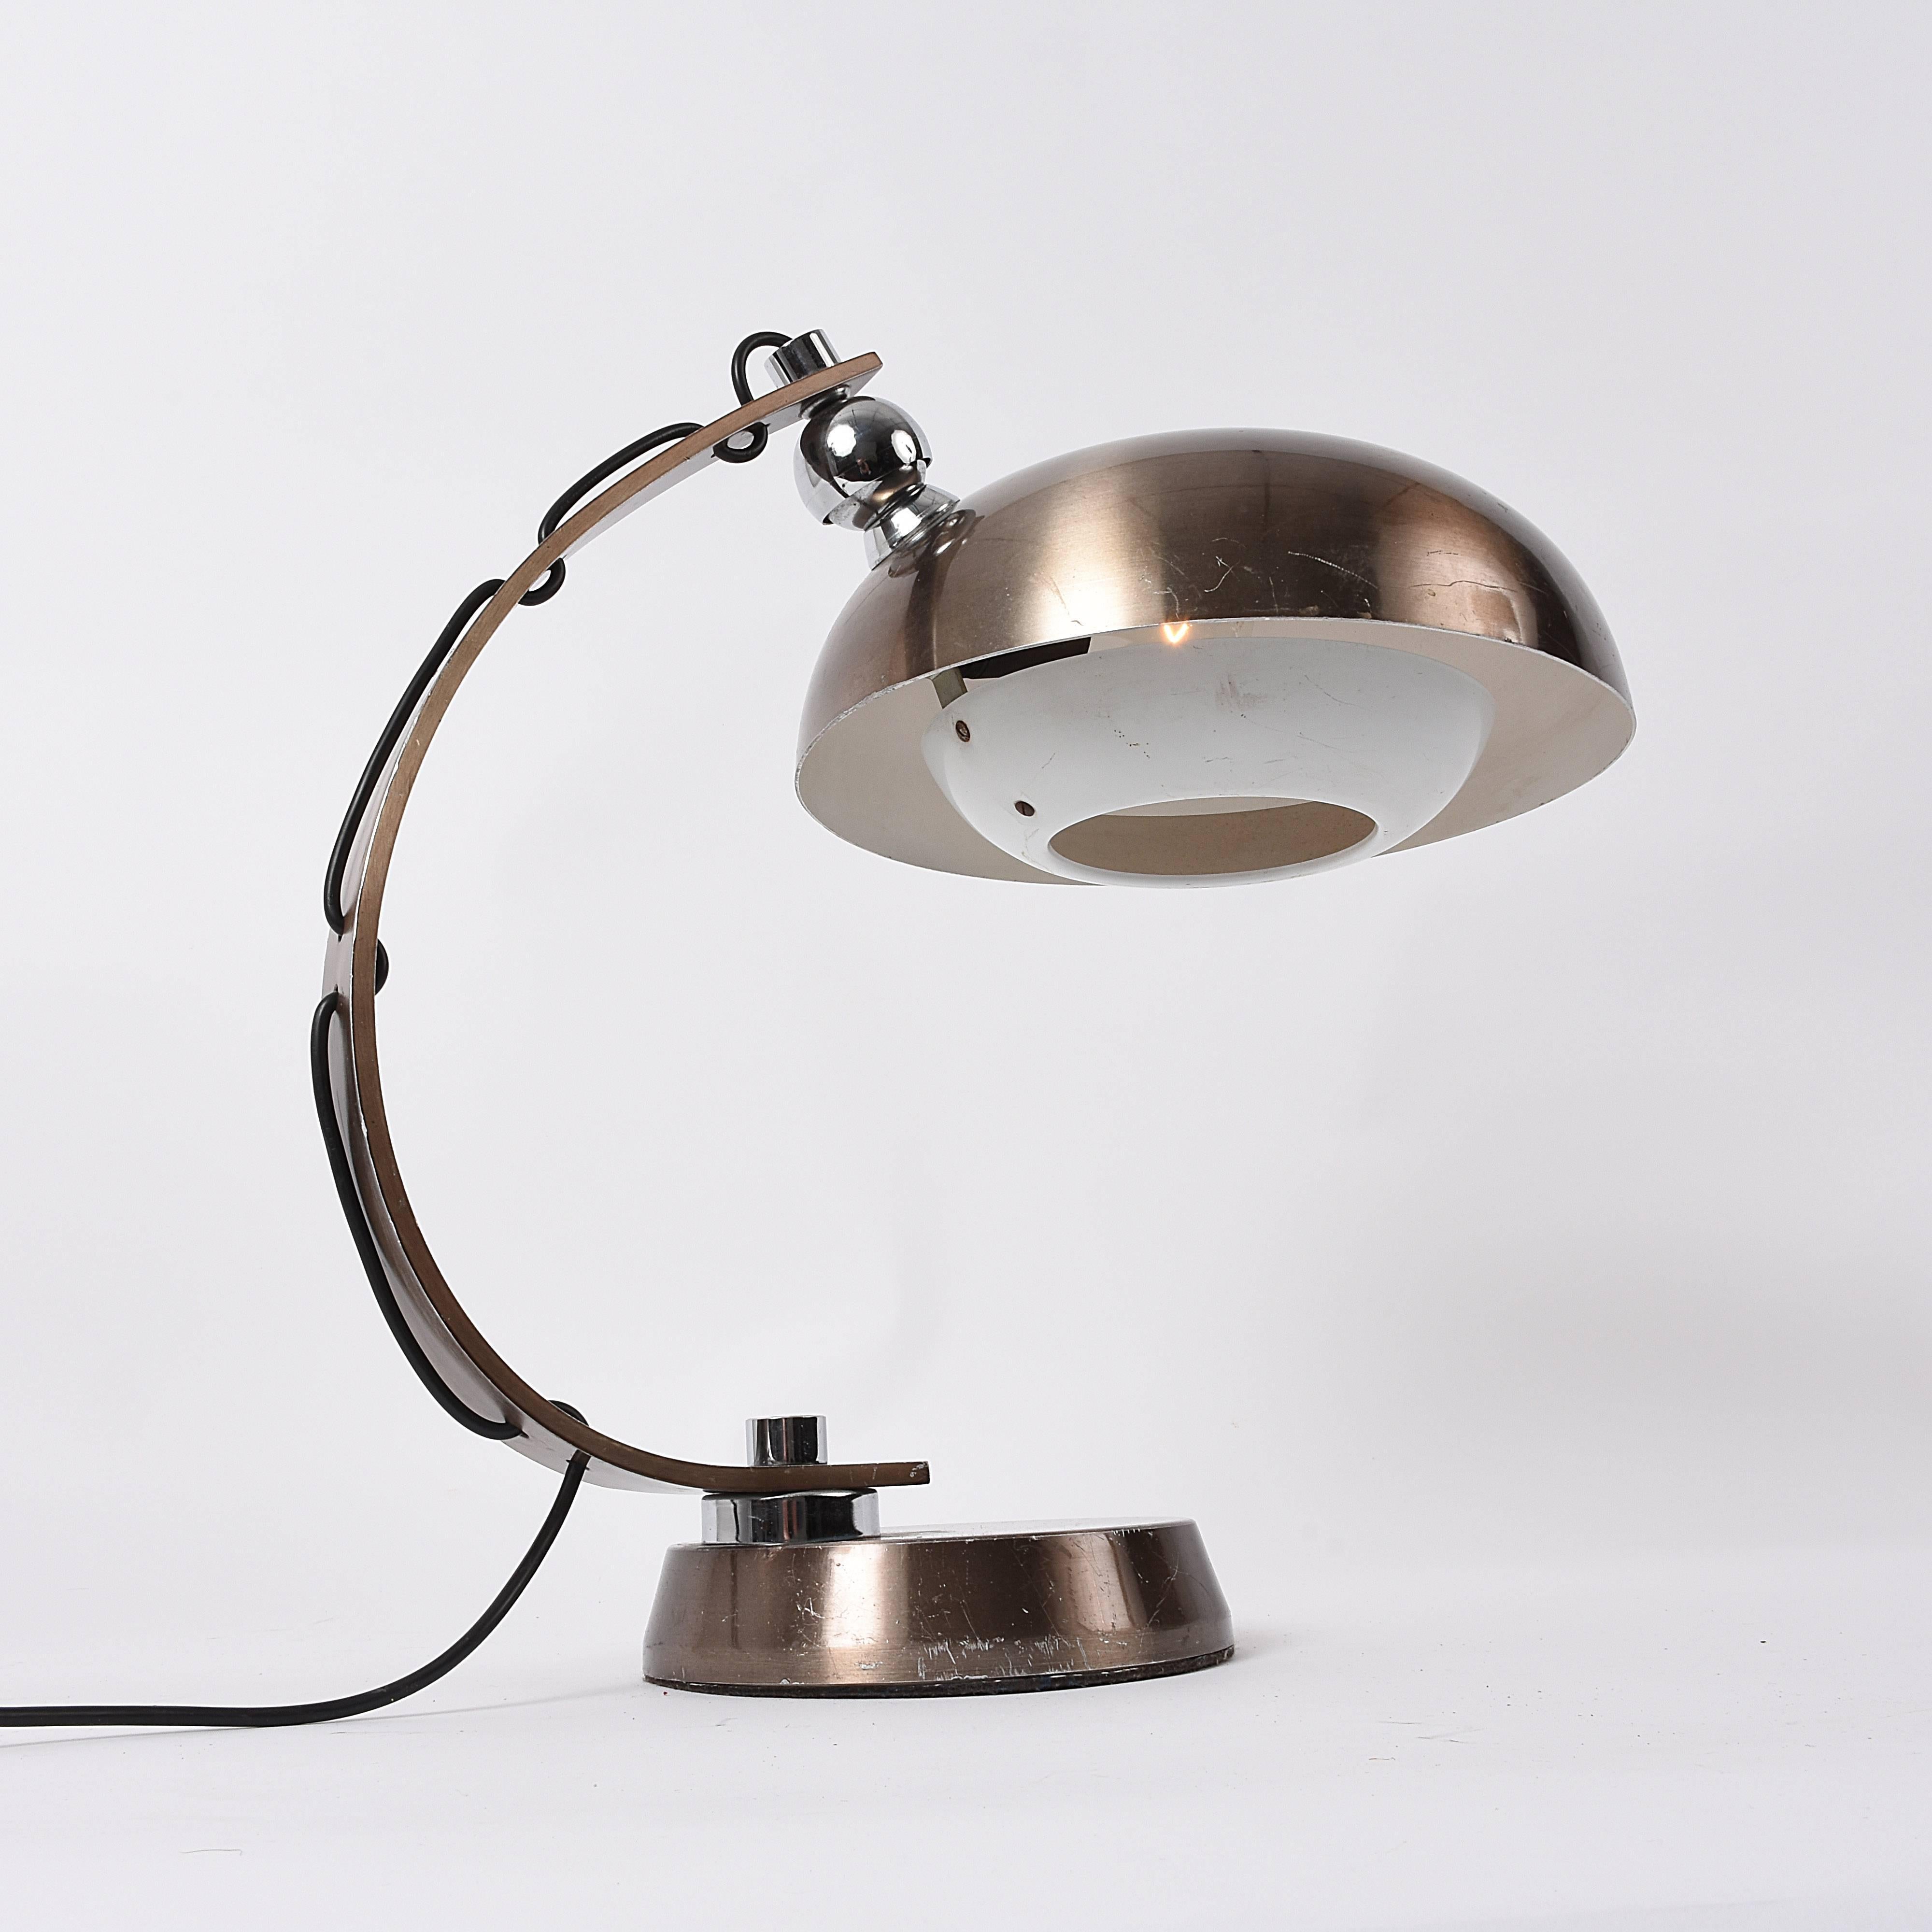 Metal Brushed and Bronzed Aluminum Italian Table Lamp, 1970s Attributed to Arredoluce For Sale